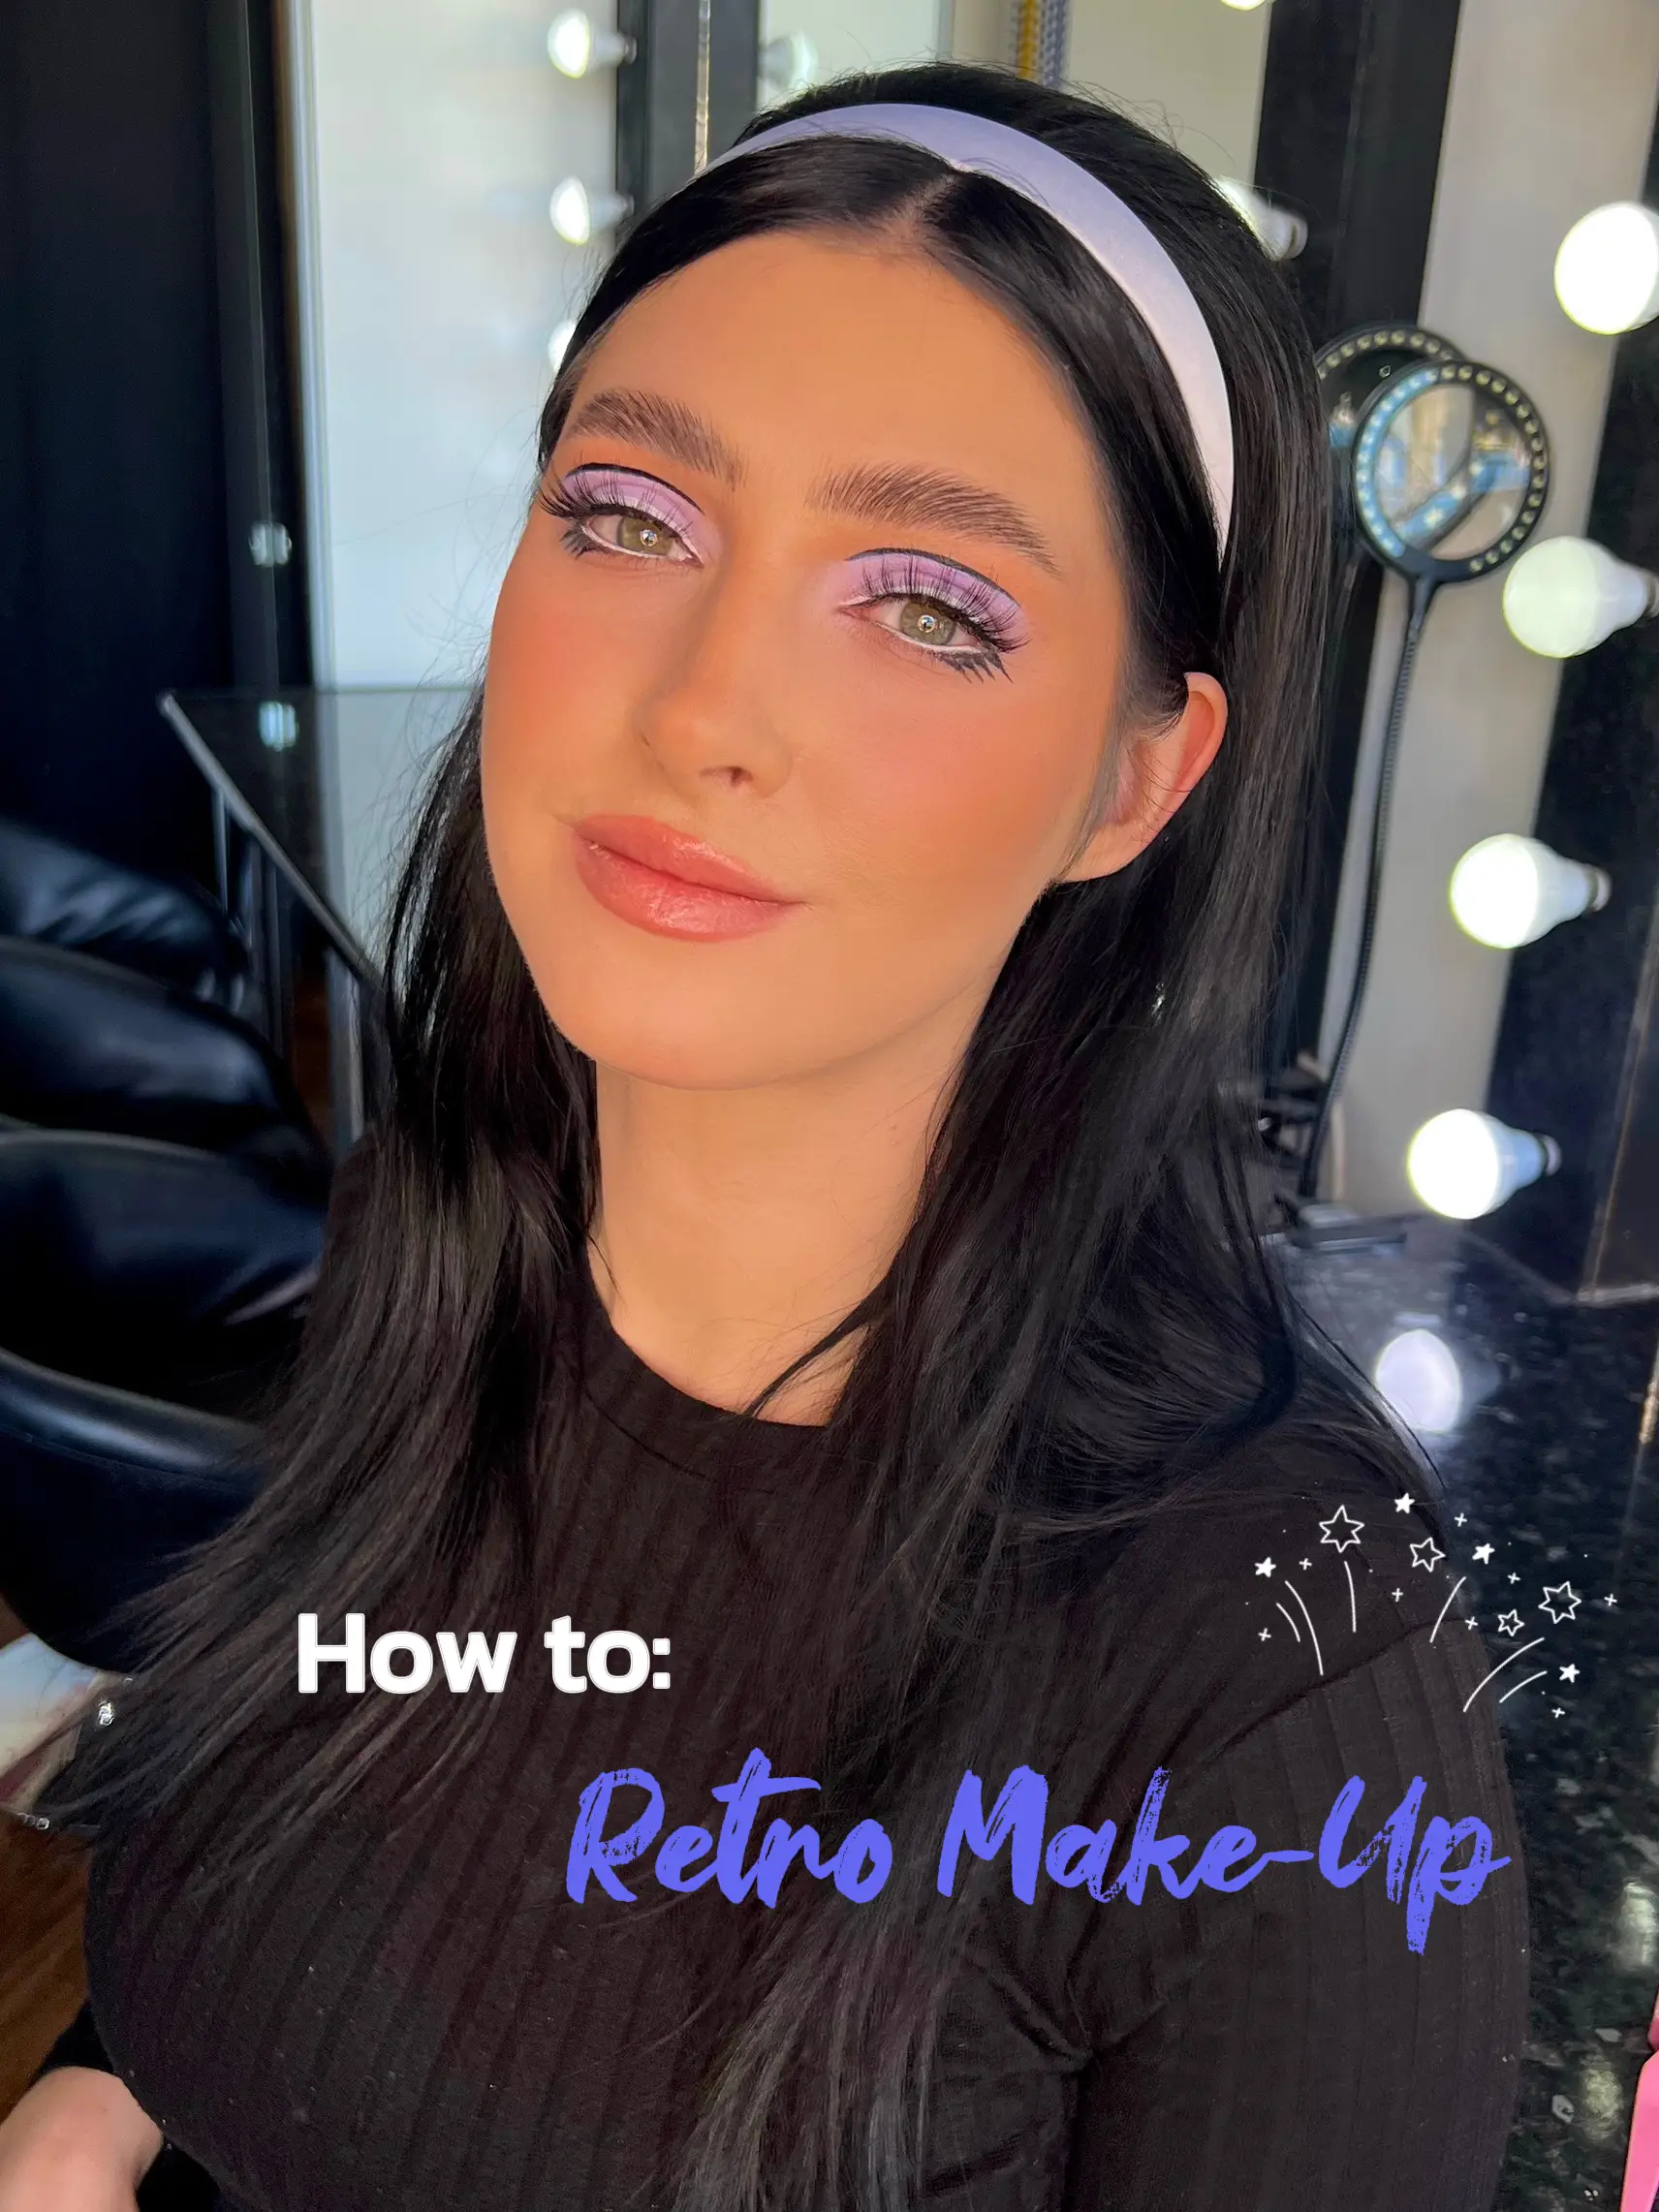 70s Makeup Style: How To Achieve the Look